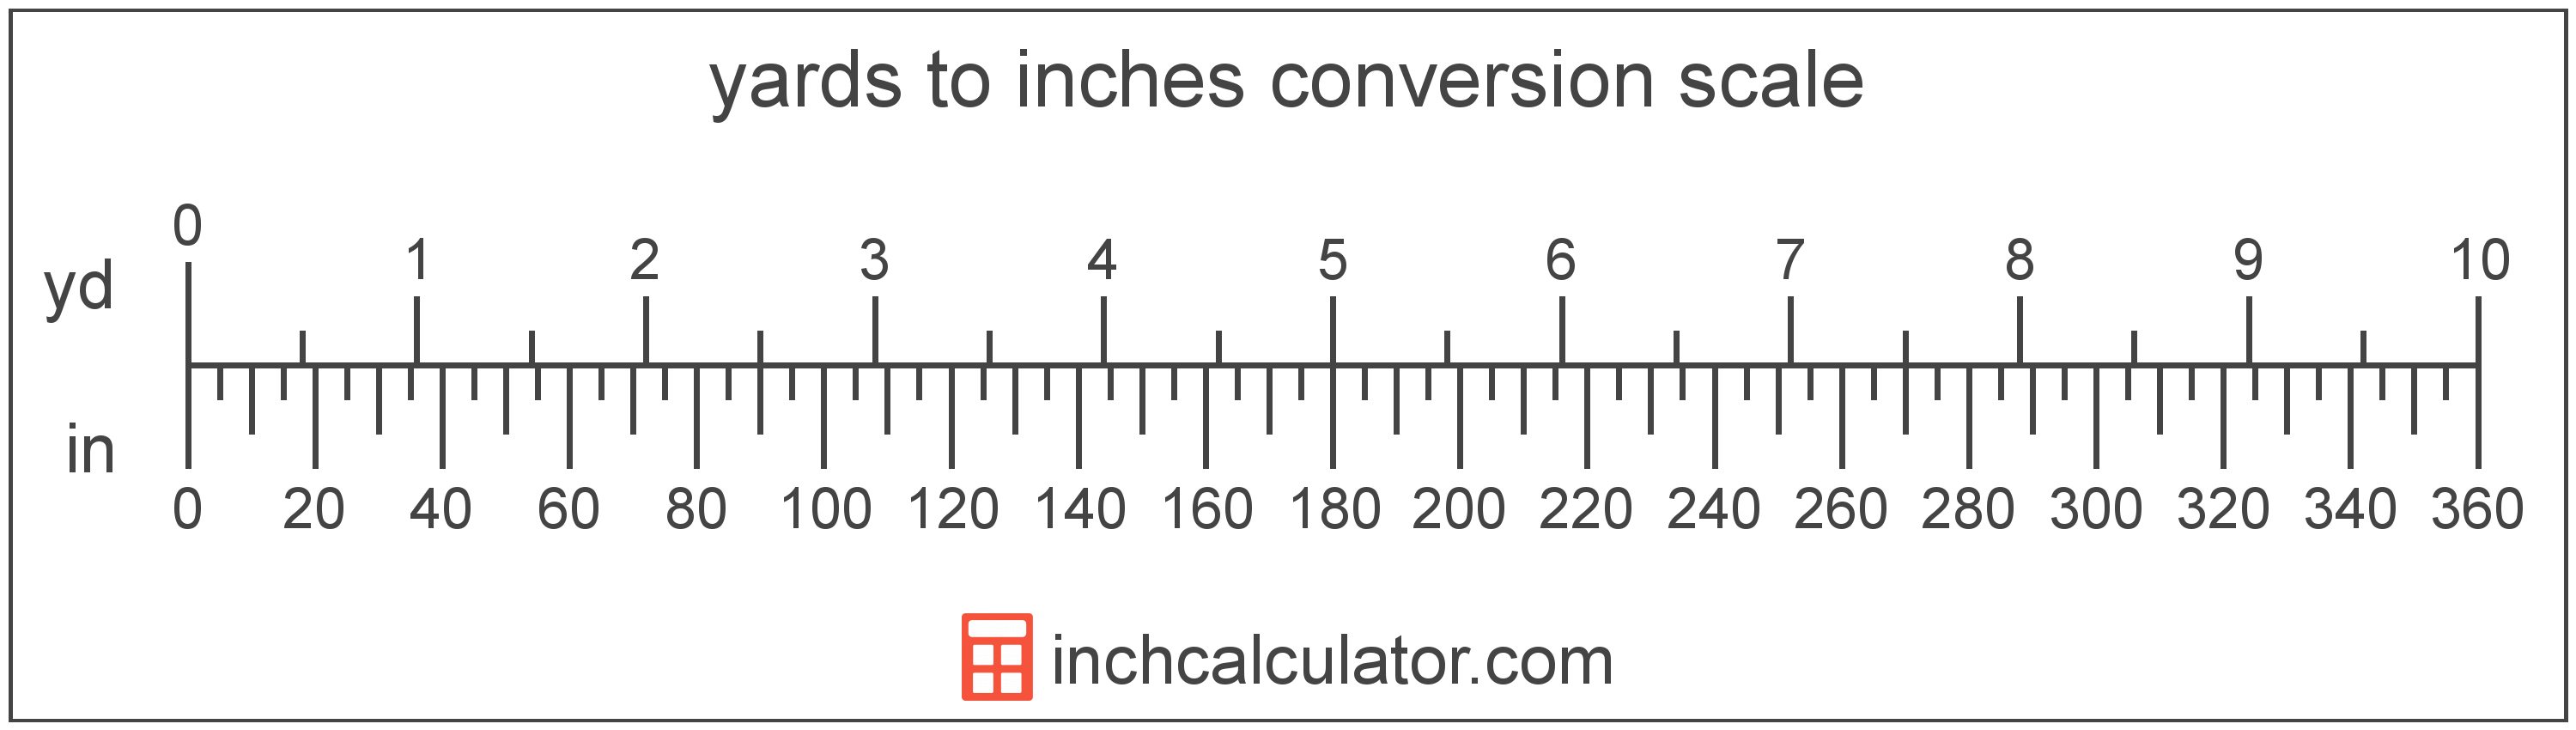 Dag Golf Incarijk Inches to Yards Conversion (in to yd) - Inch Calculator